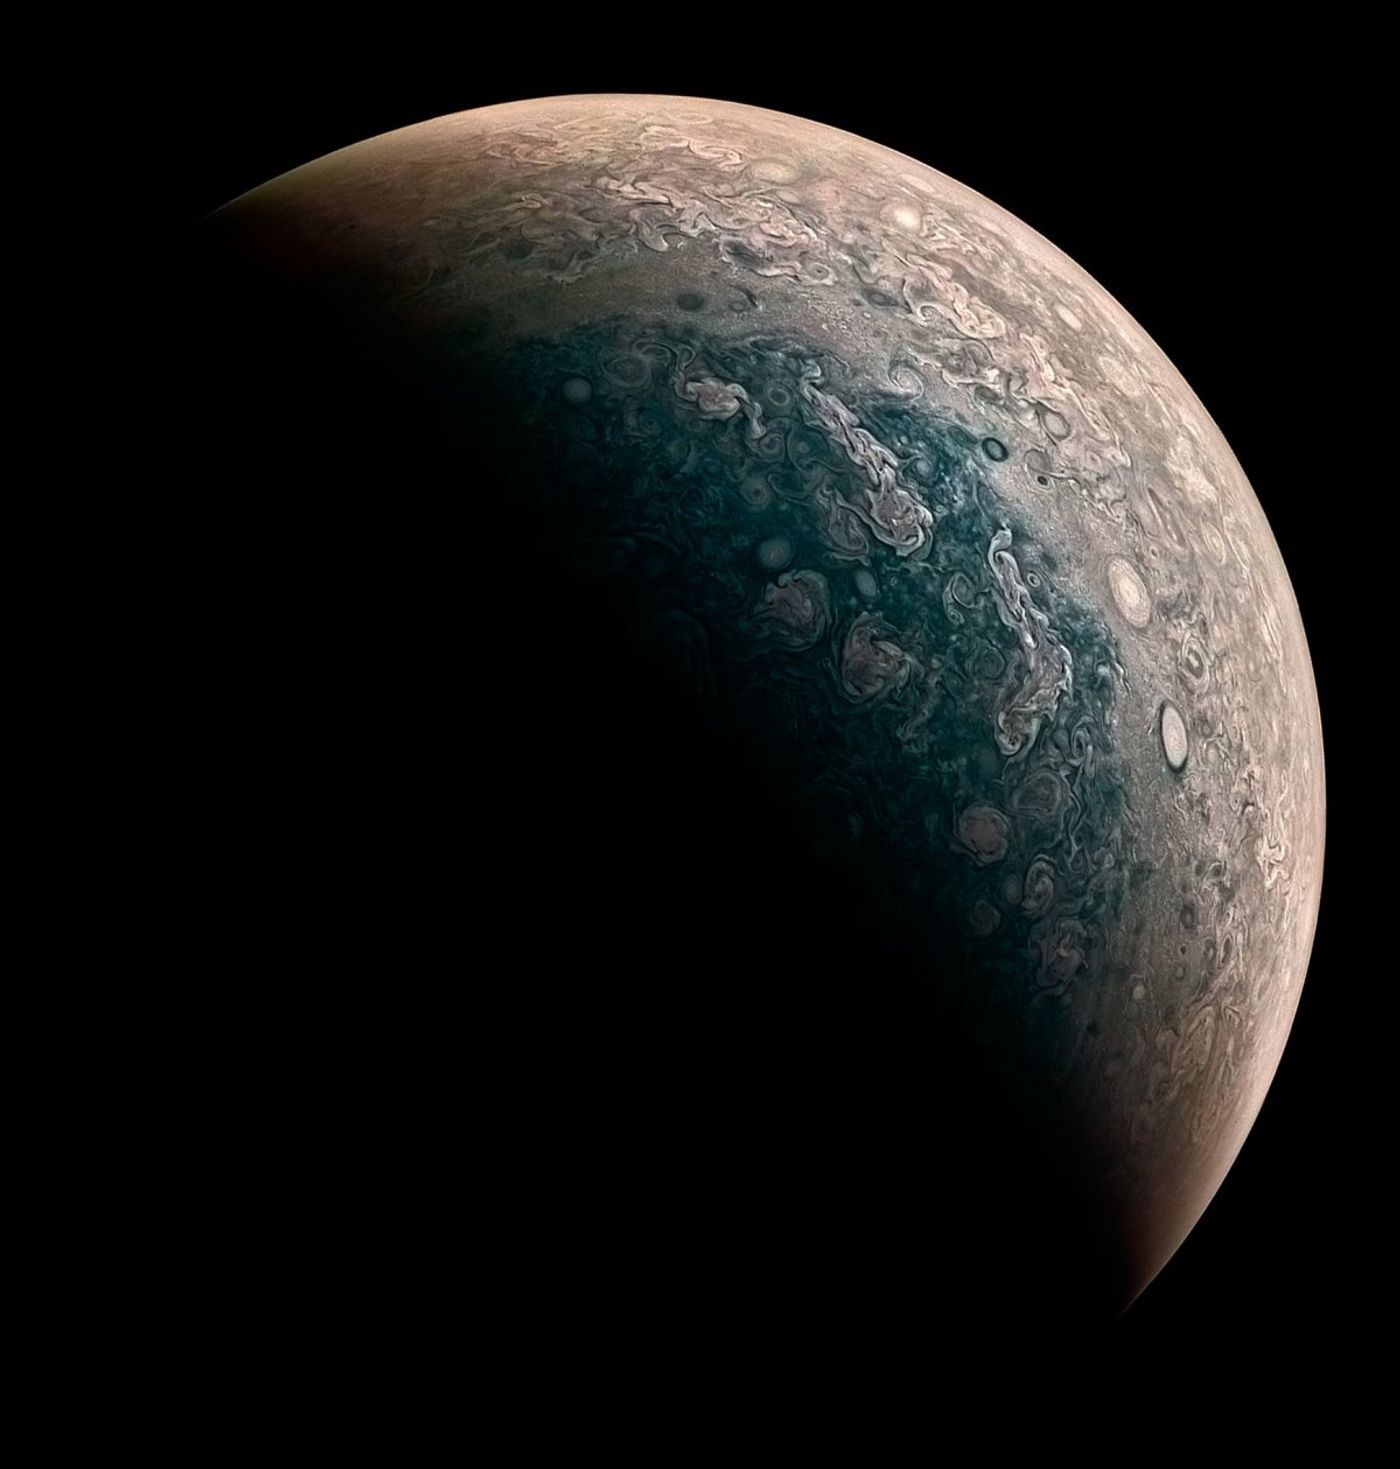 A processed image of Jupiter's North pole from the perspective of Juno.